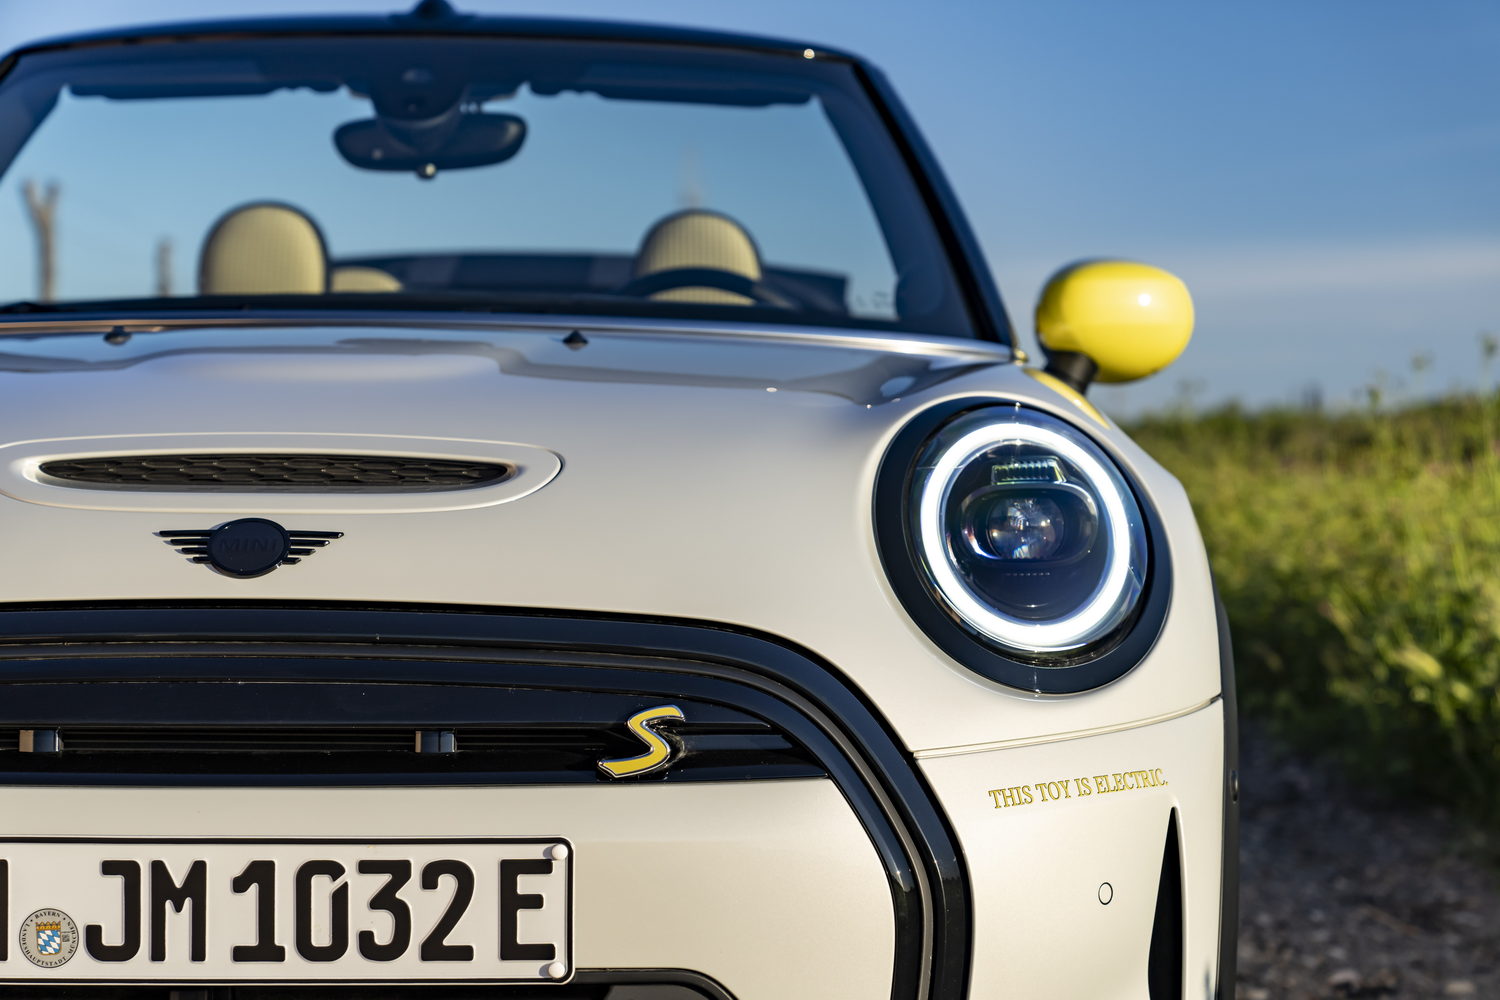 MINI reveals one-off electric convertible